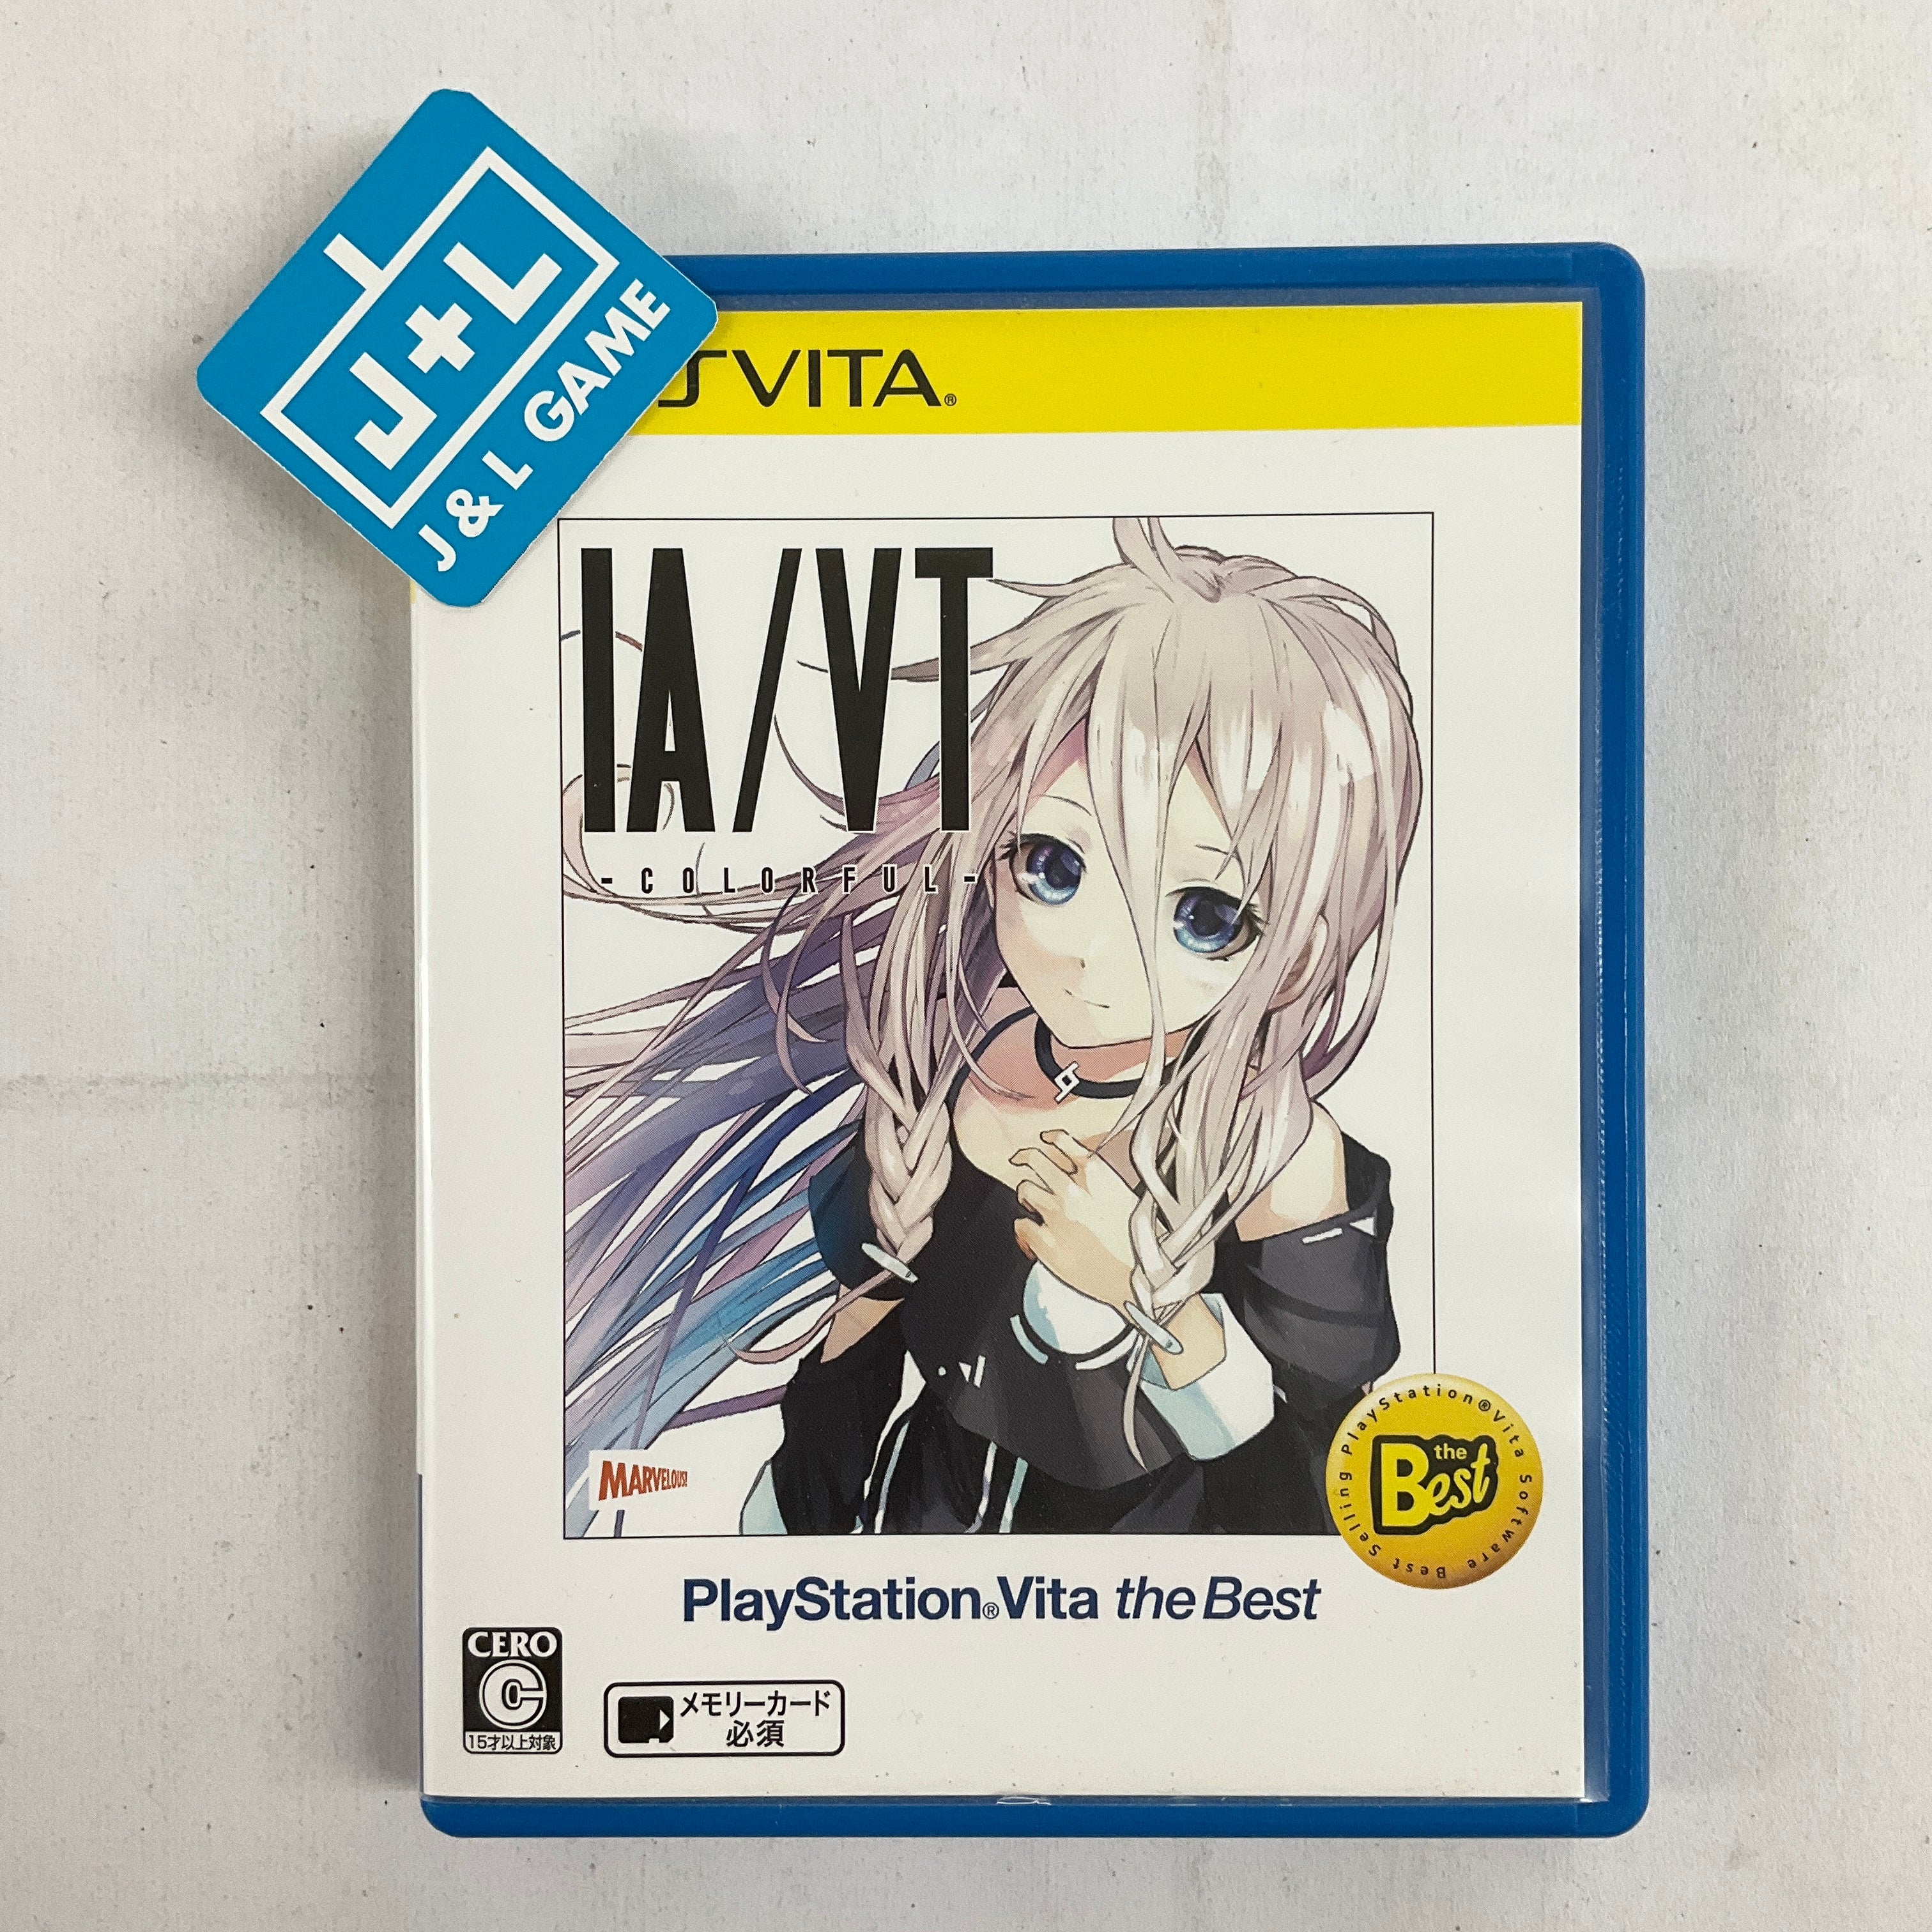 IA/VT -COLORFUL- (PlayStation Vita the Best) - (PSV) PS Vita [Pre-Owned] (Japanese Import) Video Games Marvelous Inc.   